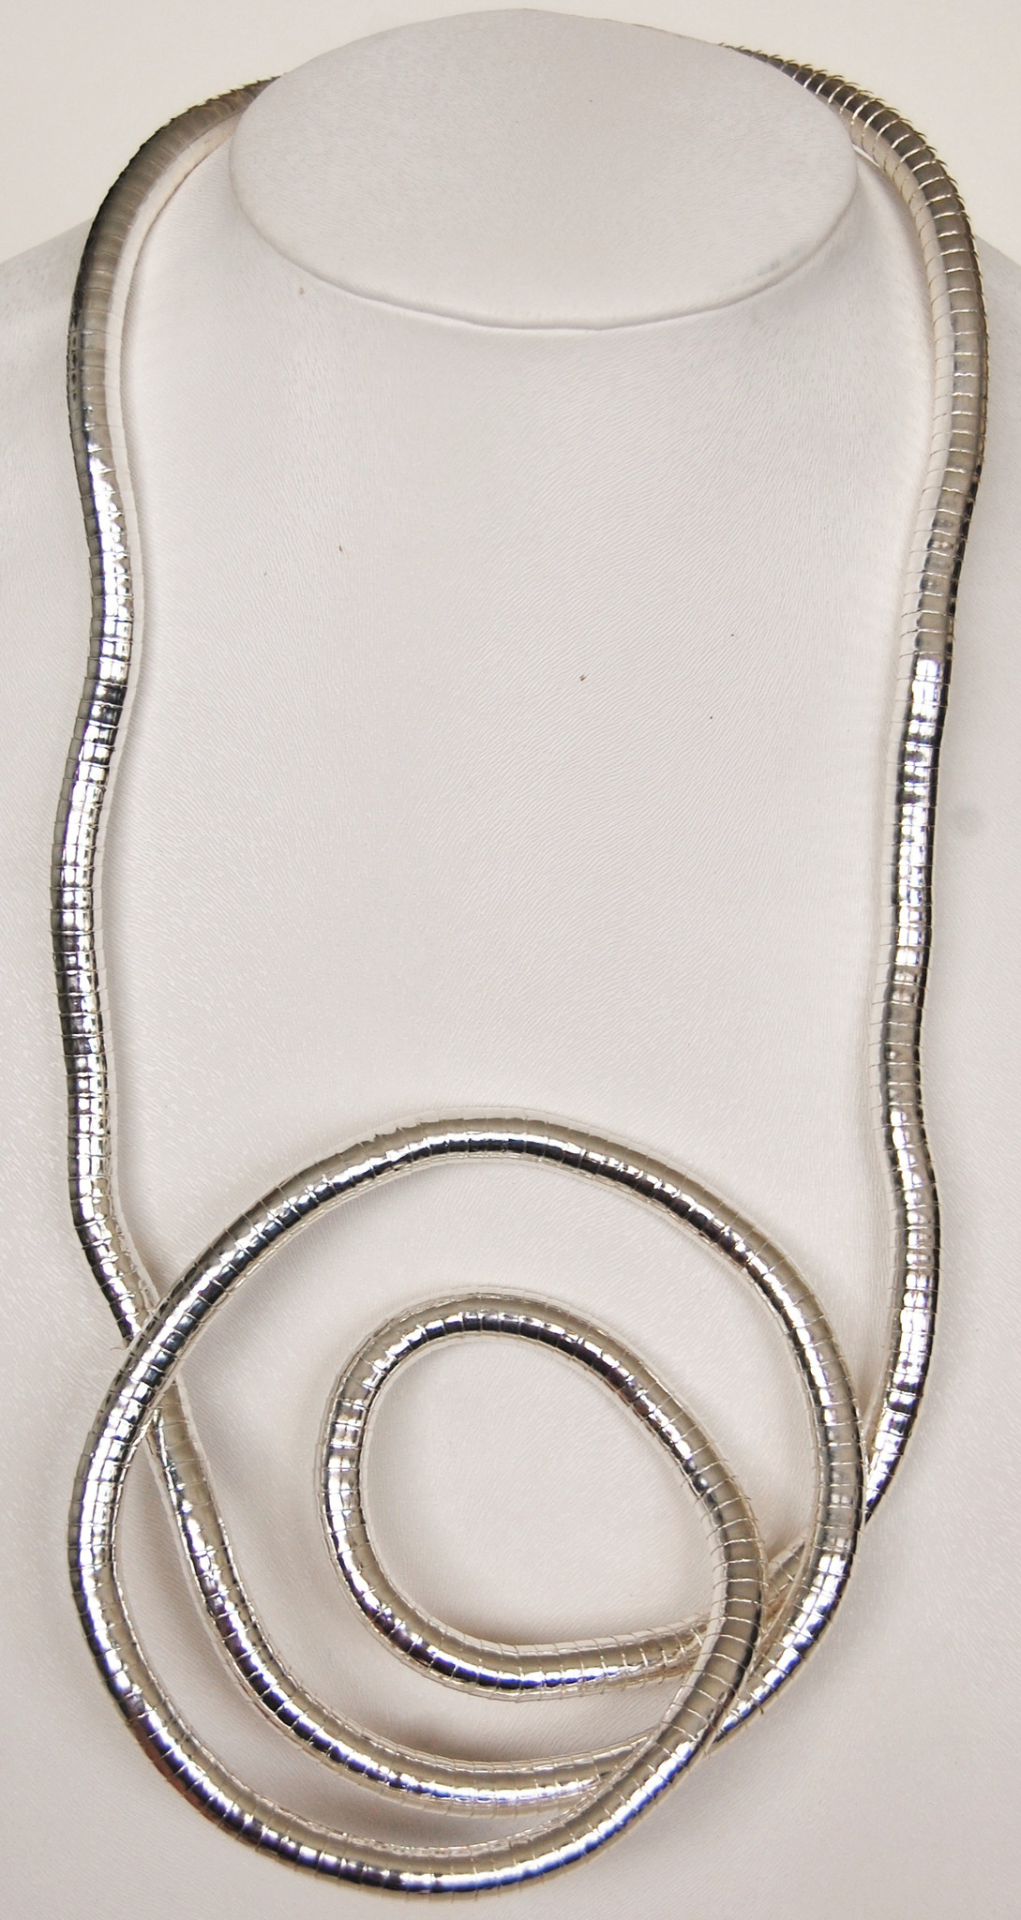 Silver SnakeTwist, 6mm Thick, 36" Circumference